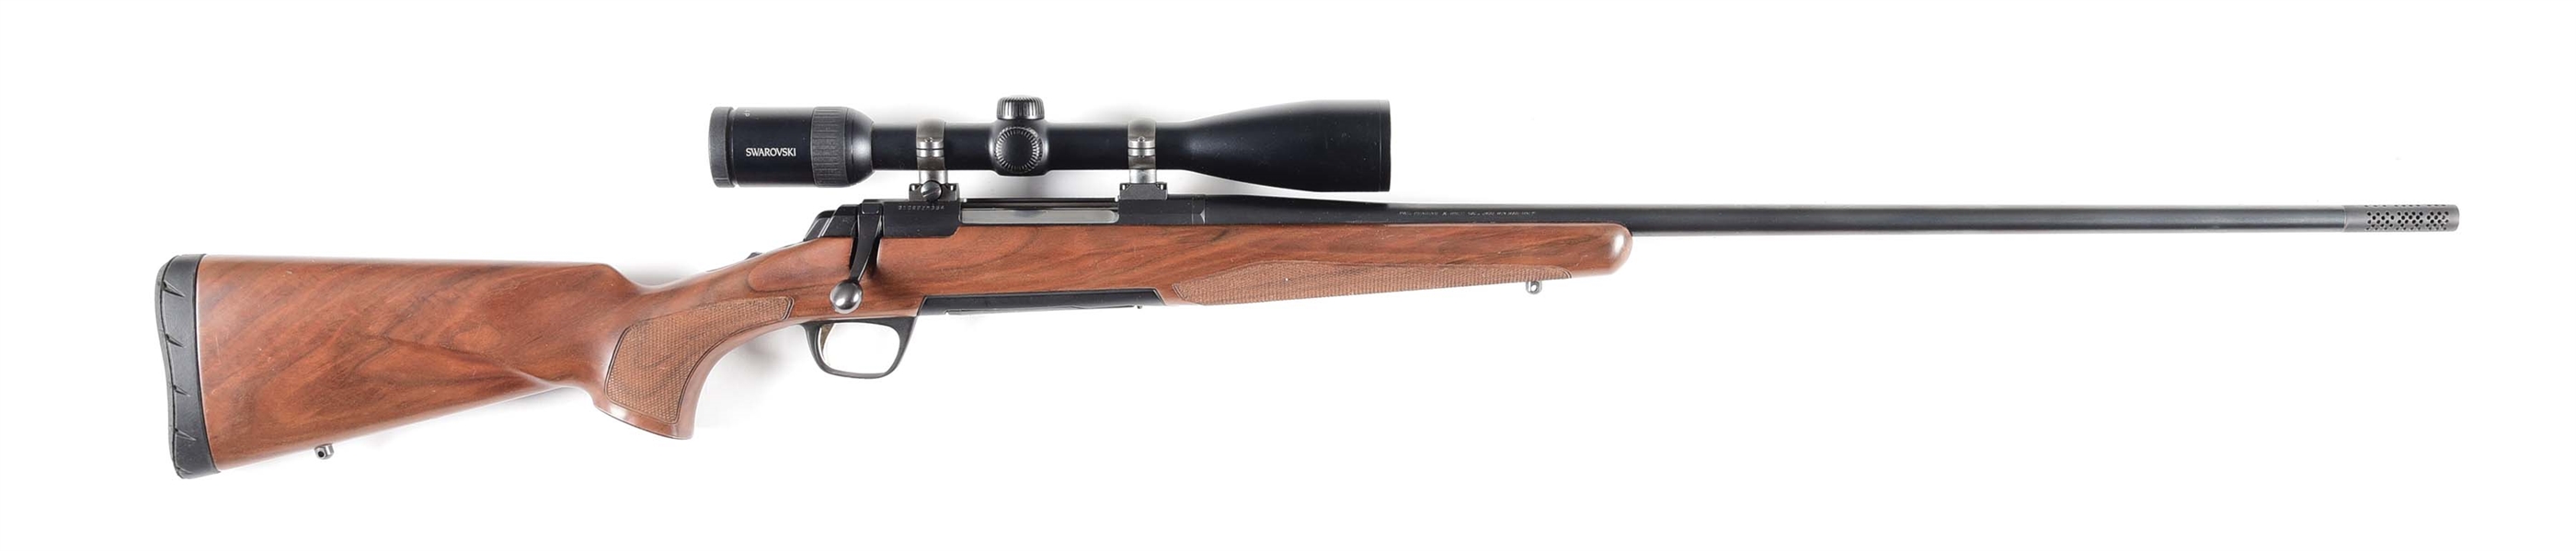 (M) BROWNING X BOLT ACTION RIFLE WITH SCOPE.